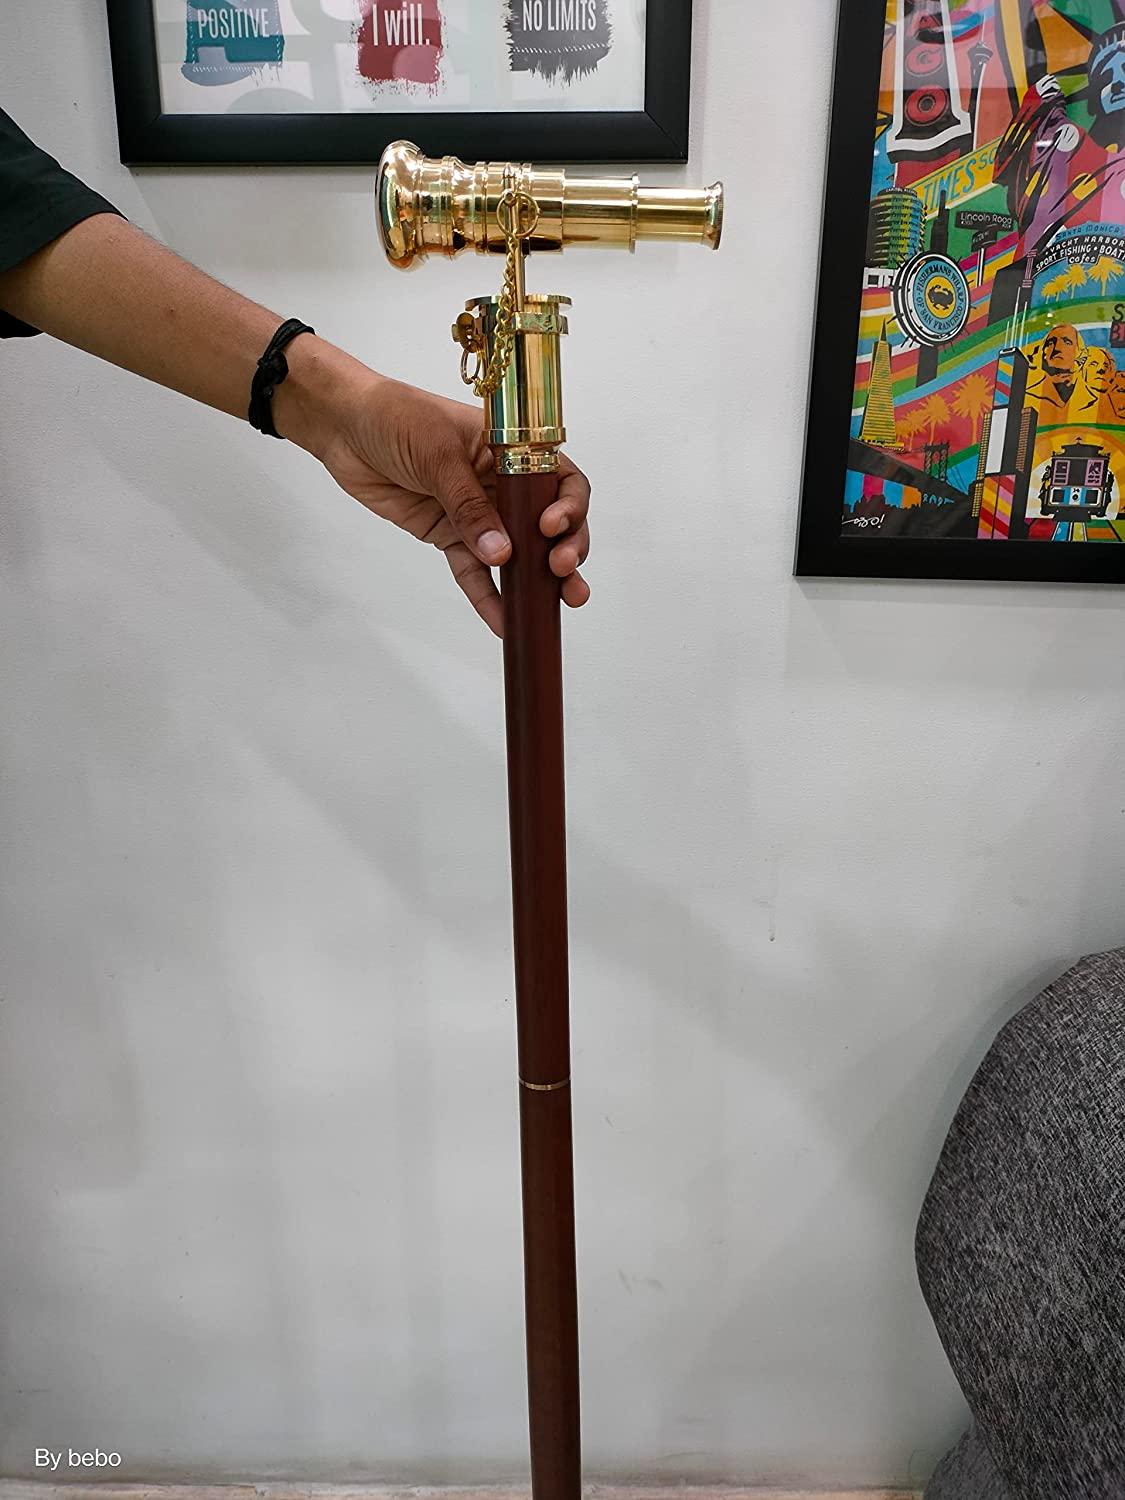 Victorian Walking Cane with Telescope Brass Handle Foldable